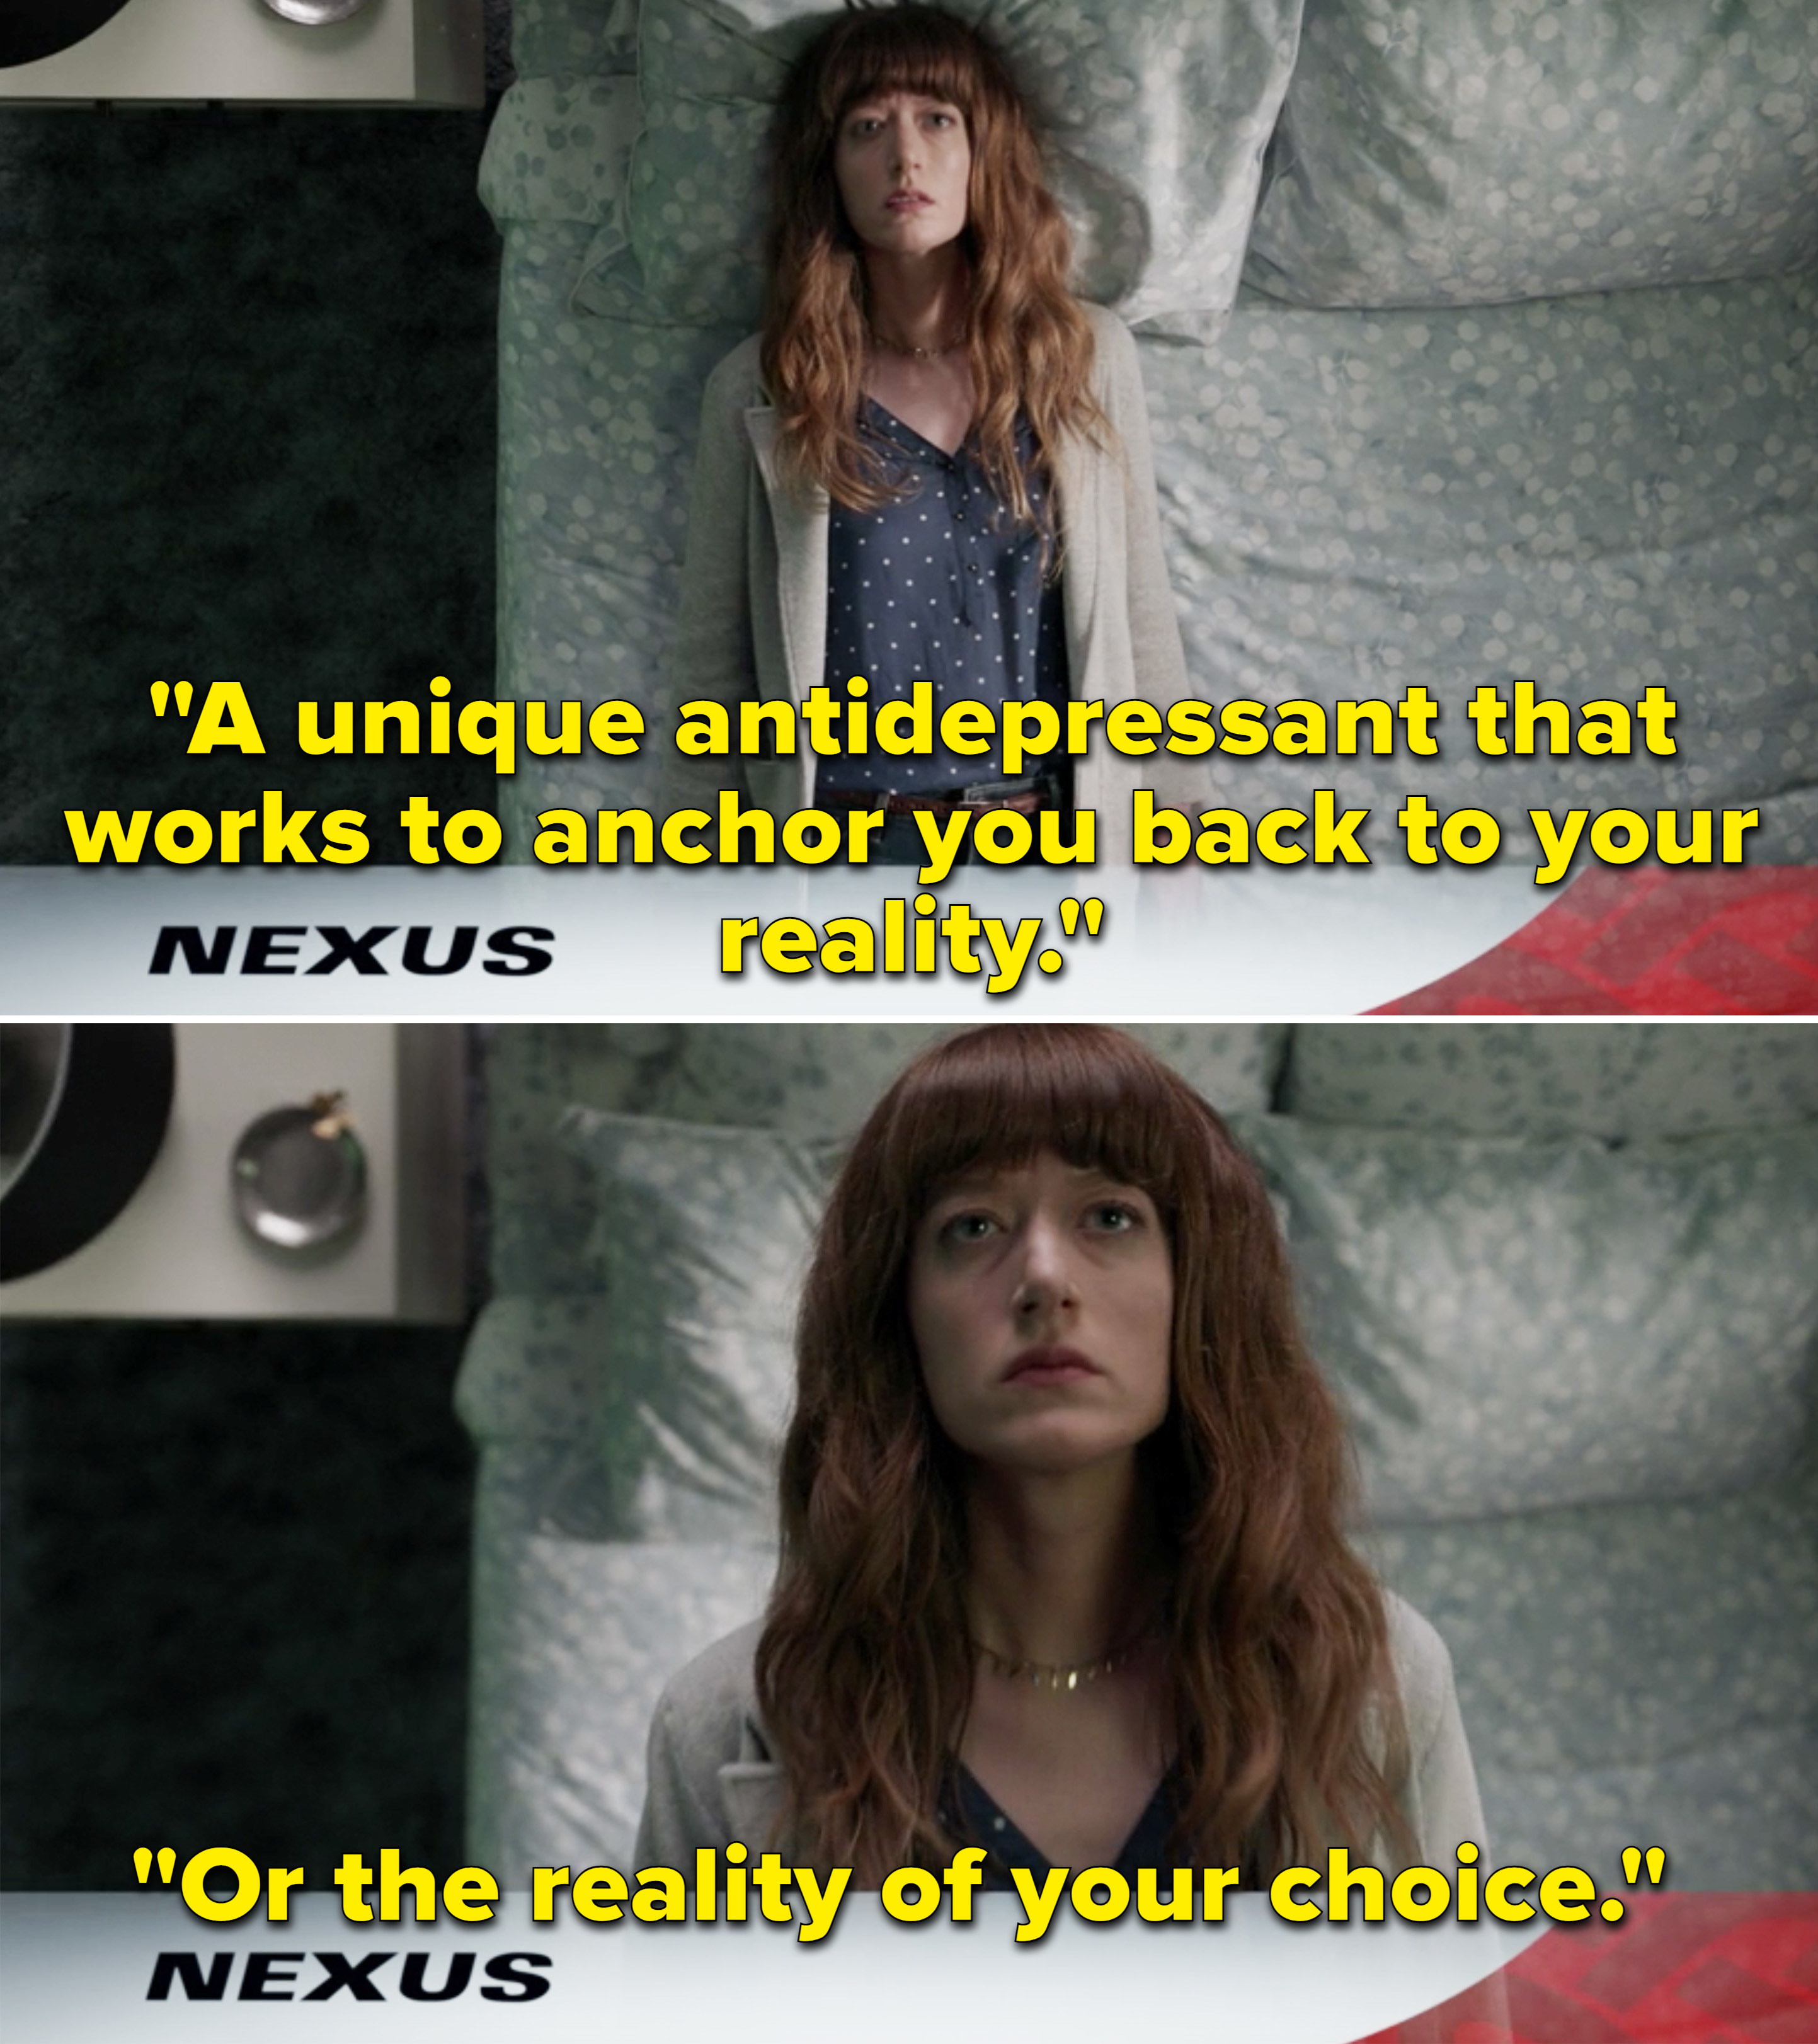 The Nexus ad saying, &quot;A unique antidepressant that works to anchor you back to your reality or the reality of your choice&quot;